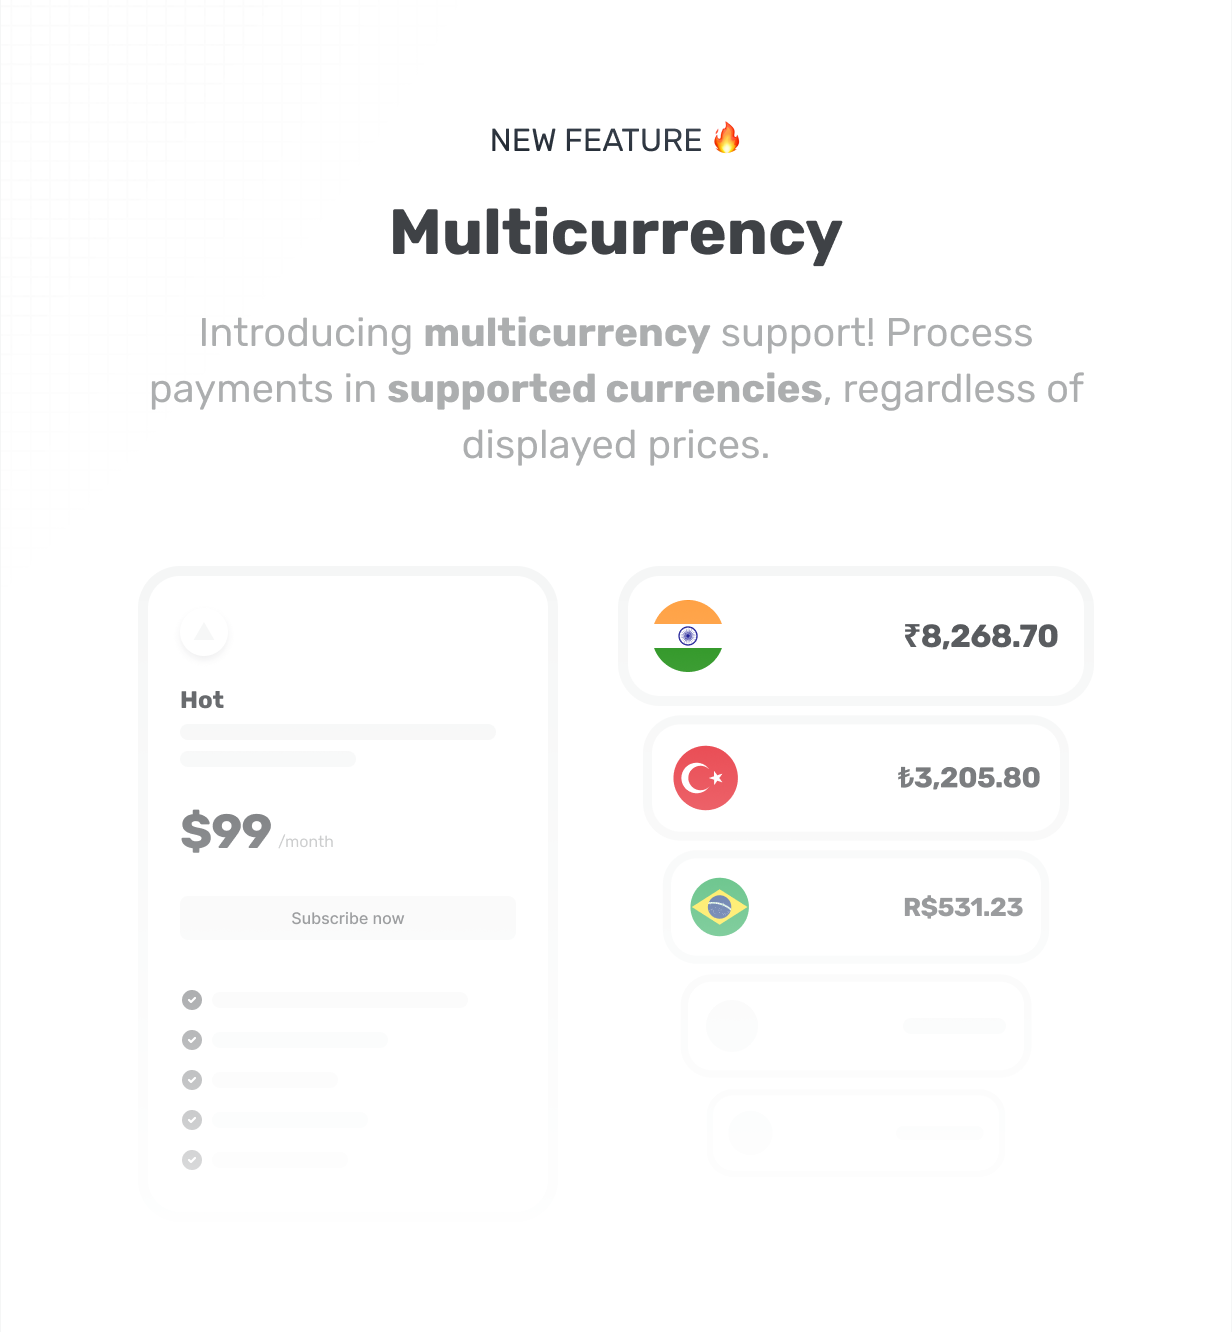 Introducing multicurrency support! Process payments in supported currencies, regardless of displayed prices. @heyaikeedo #aikeedo